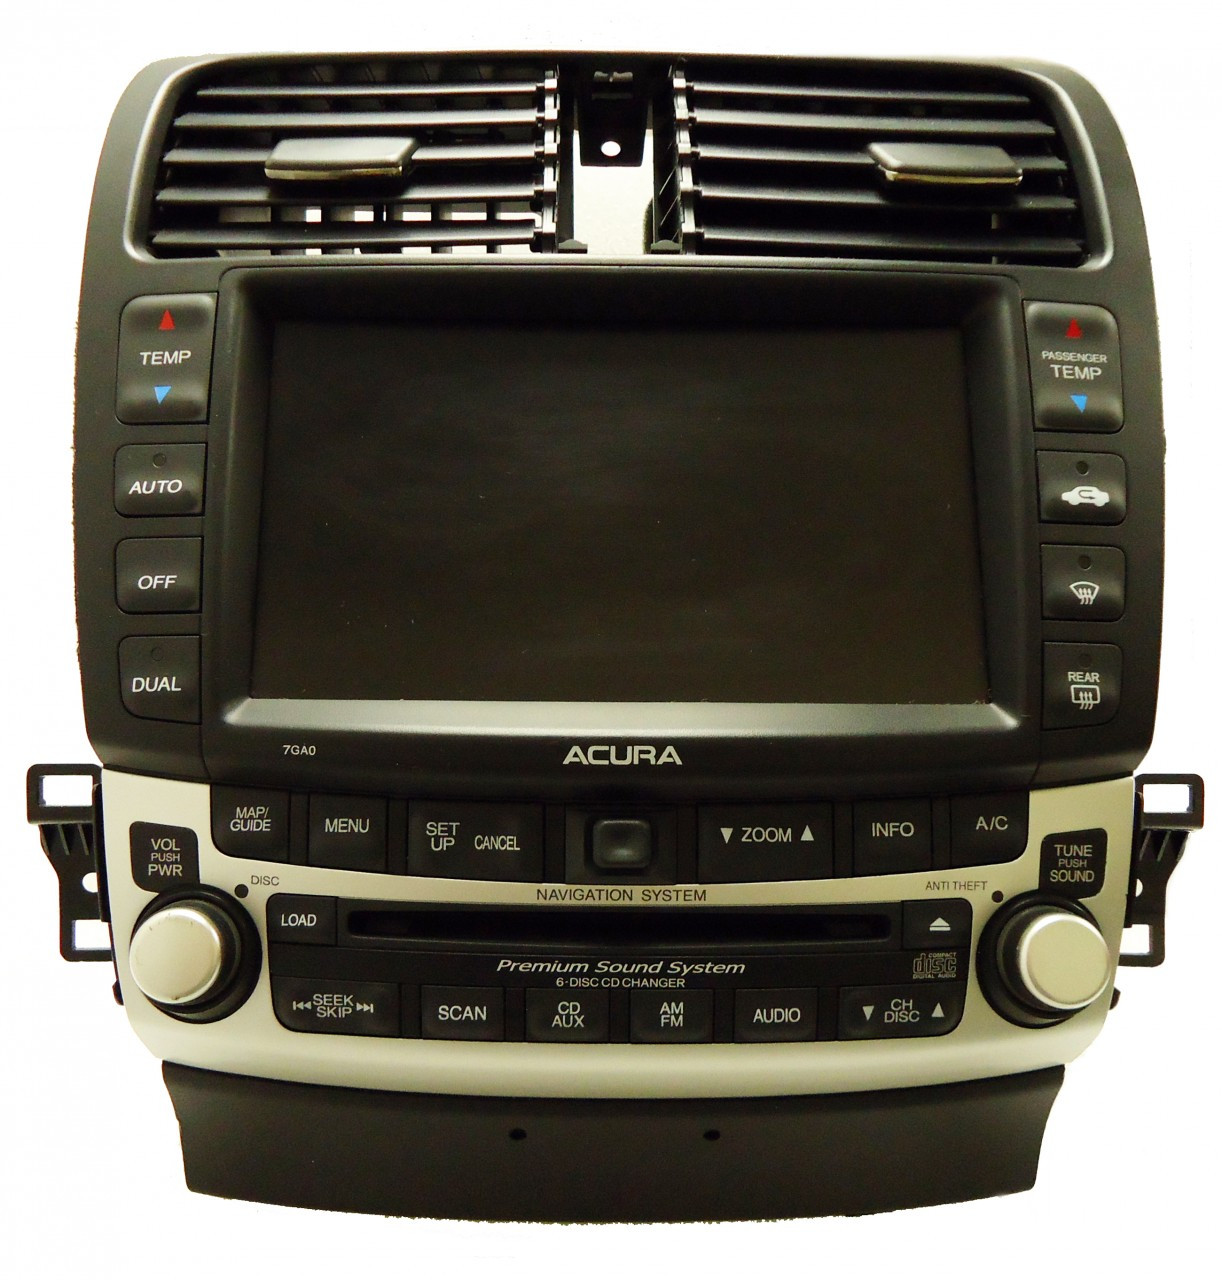 2004 acura mdx navigation dvd player not working